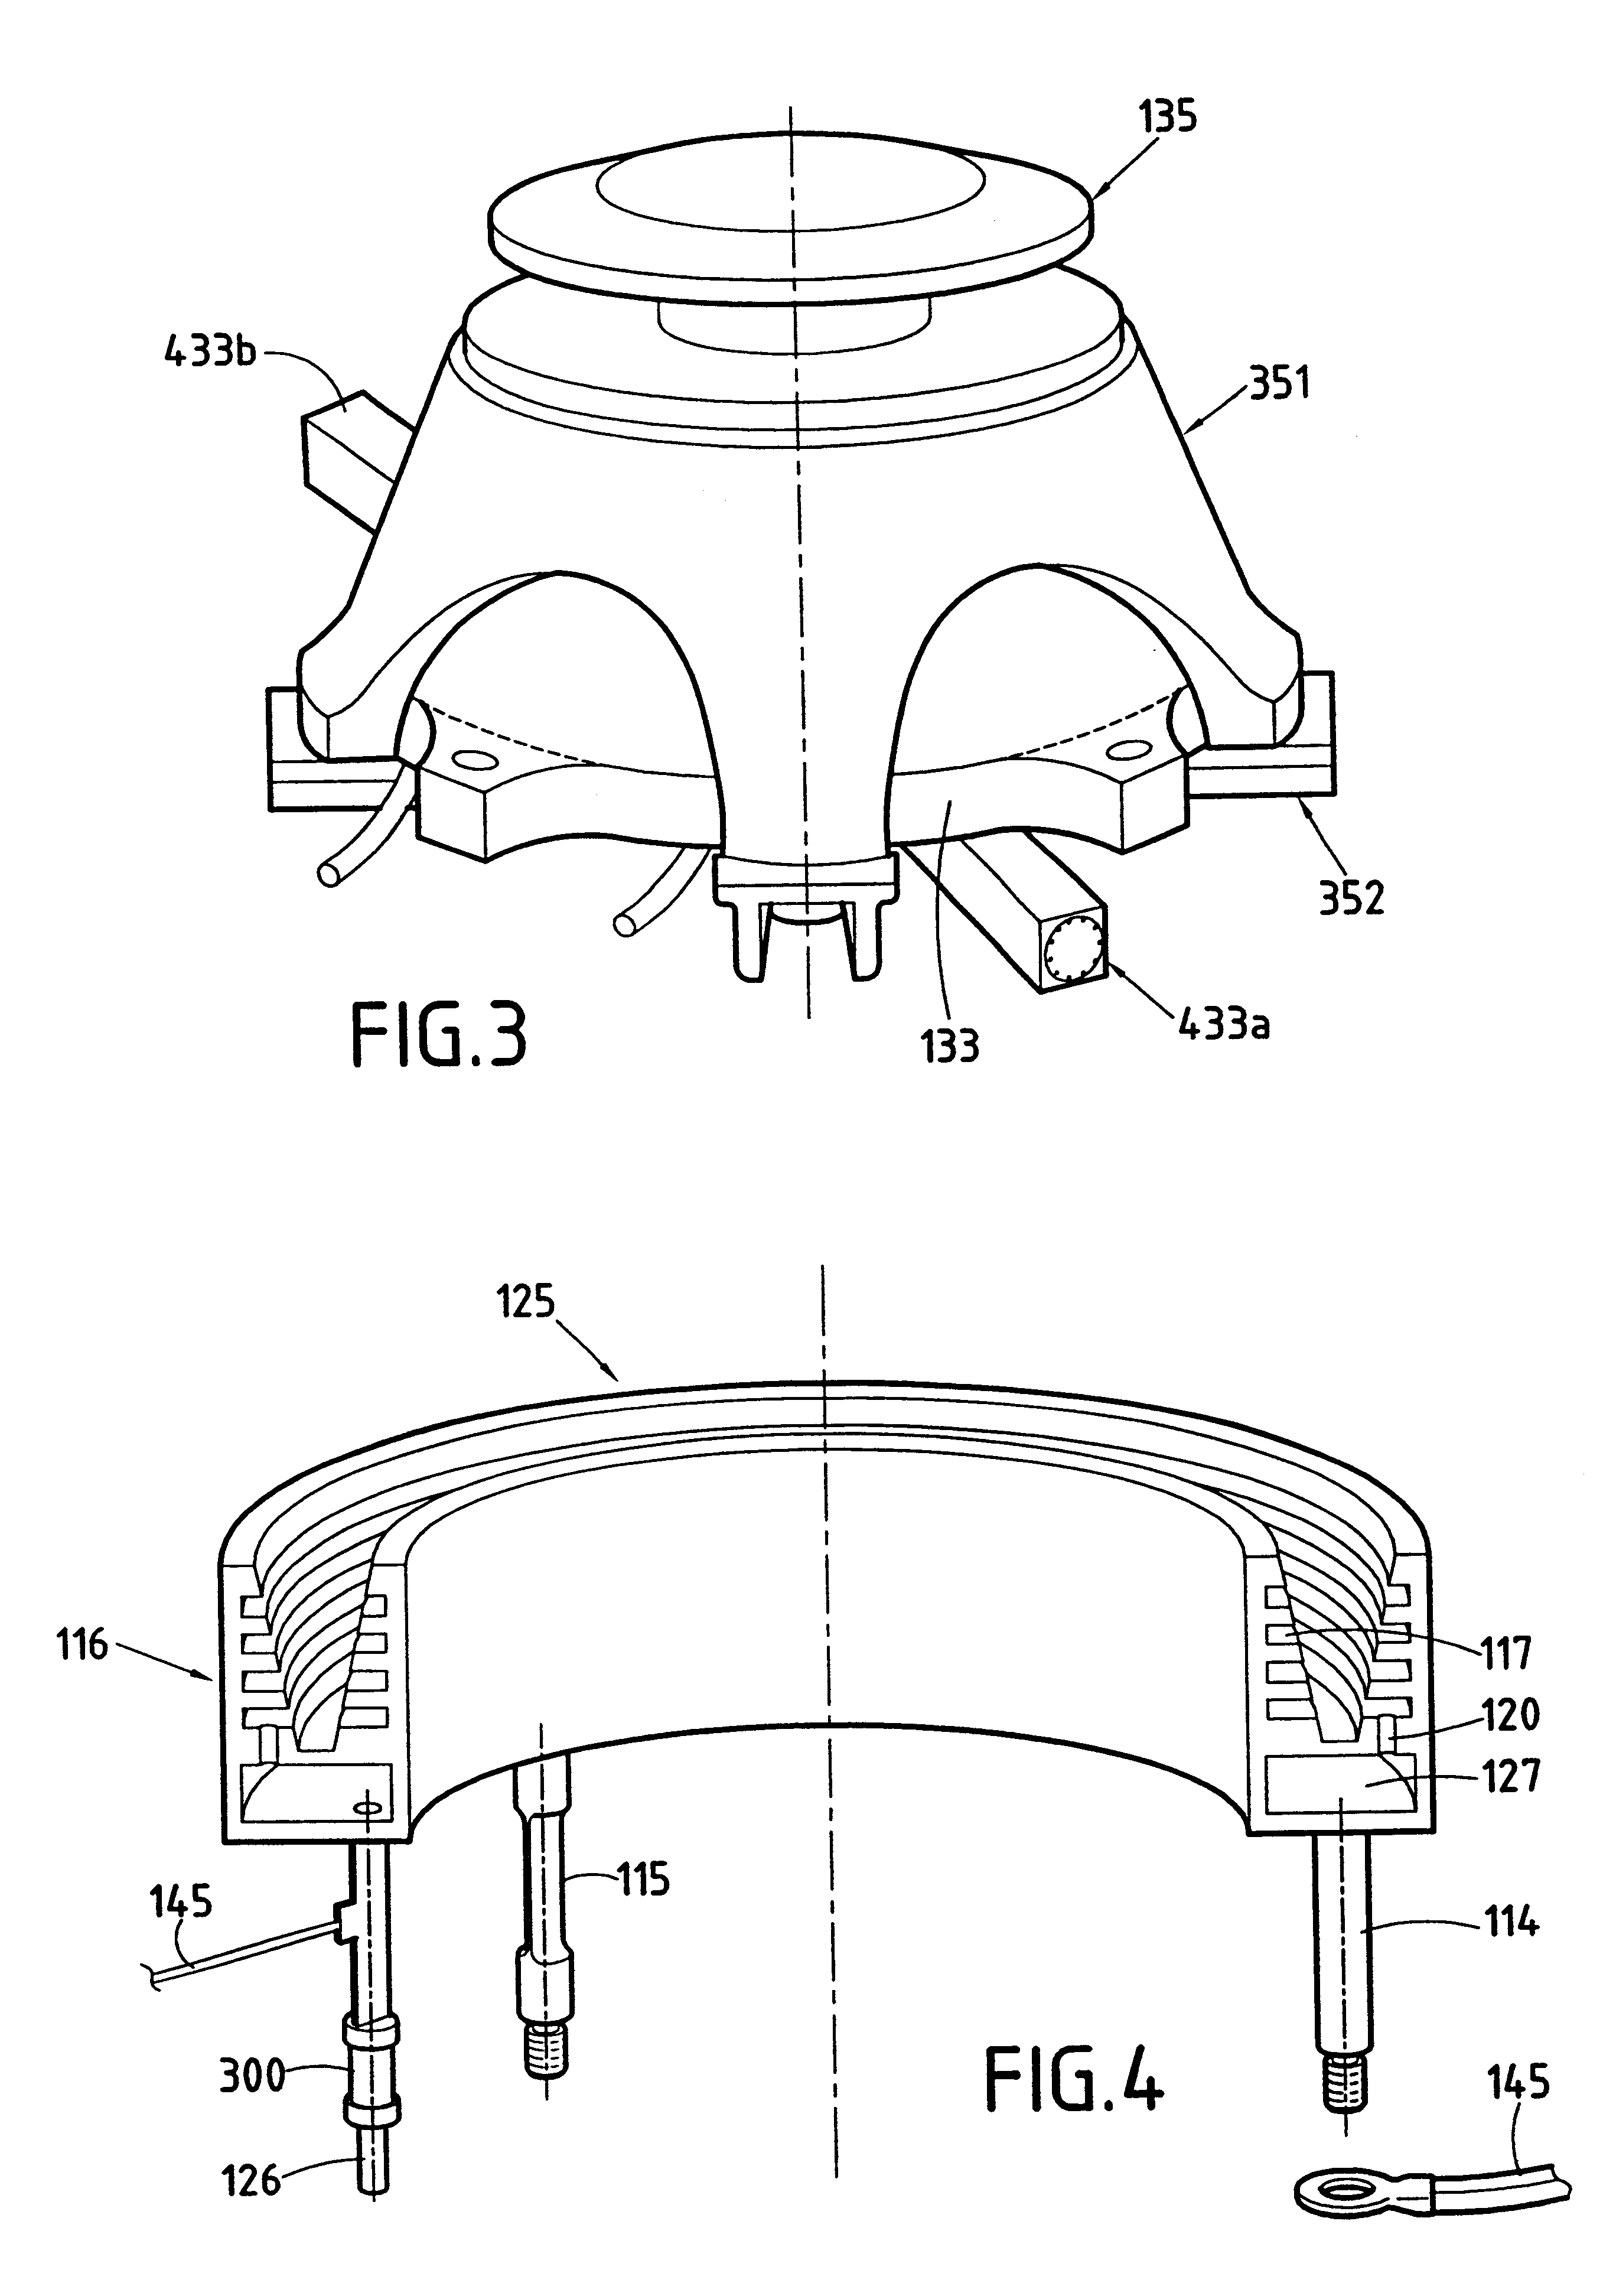 Closed electron drift plasma thruster adapted to high thermal loads